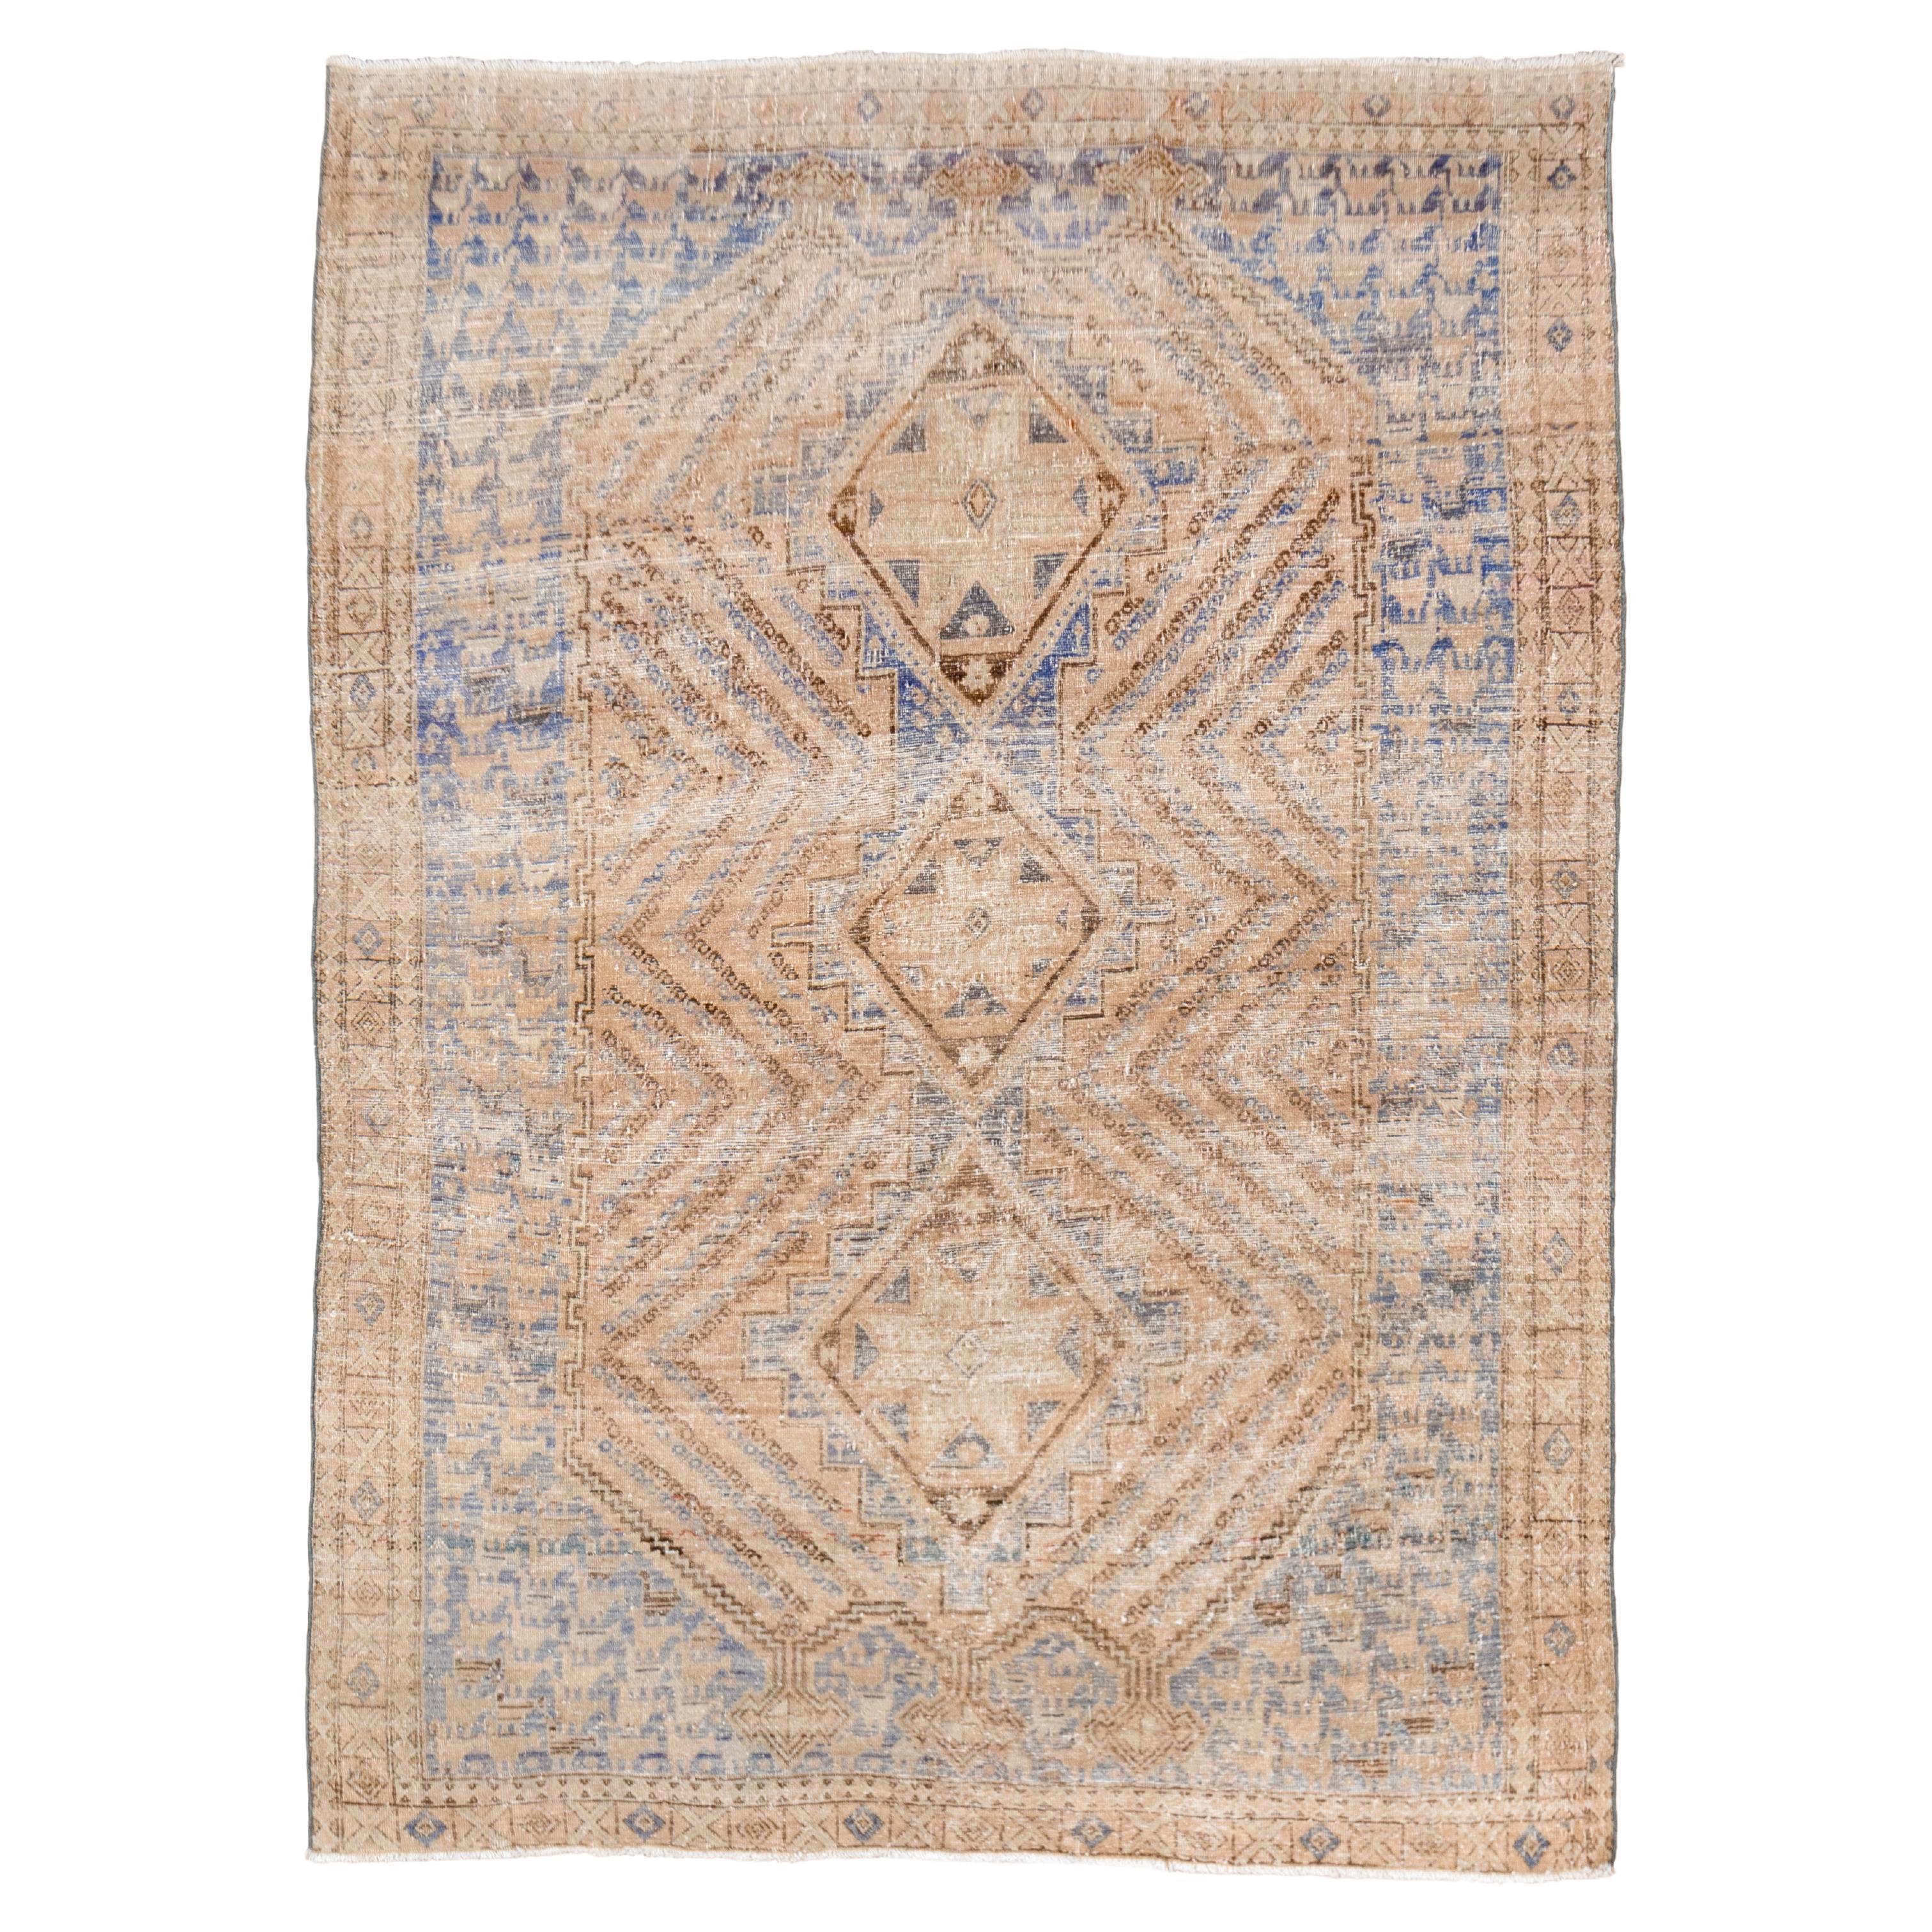 Eliko Rugs by David Ariel Antique Persian Afshar Scatter Rug, Neutral Tones